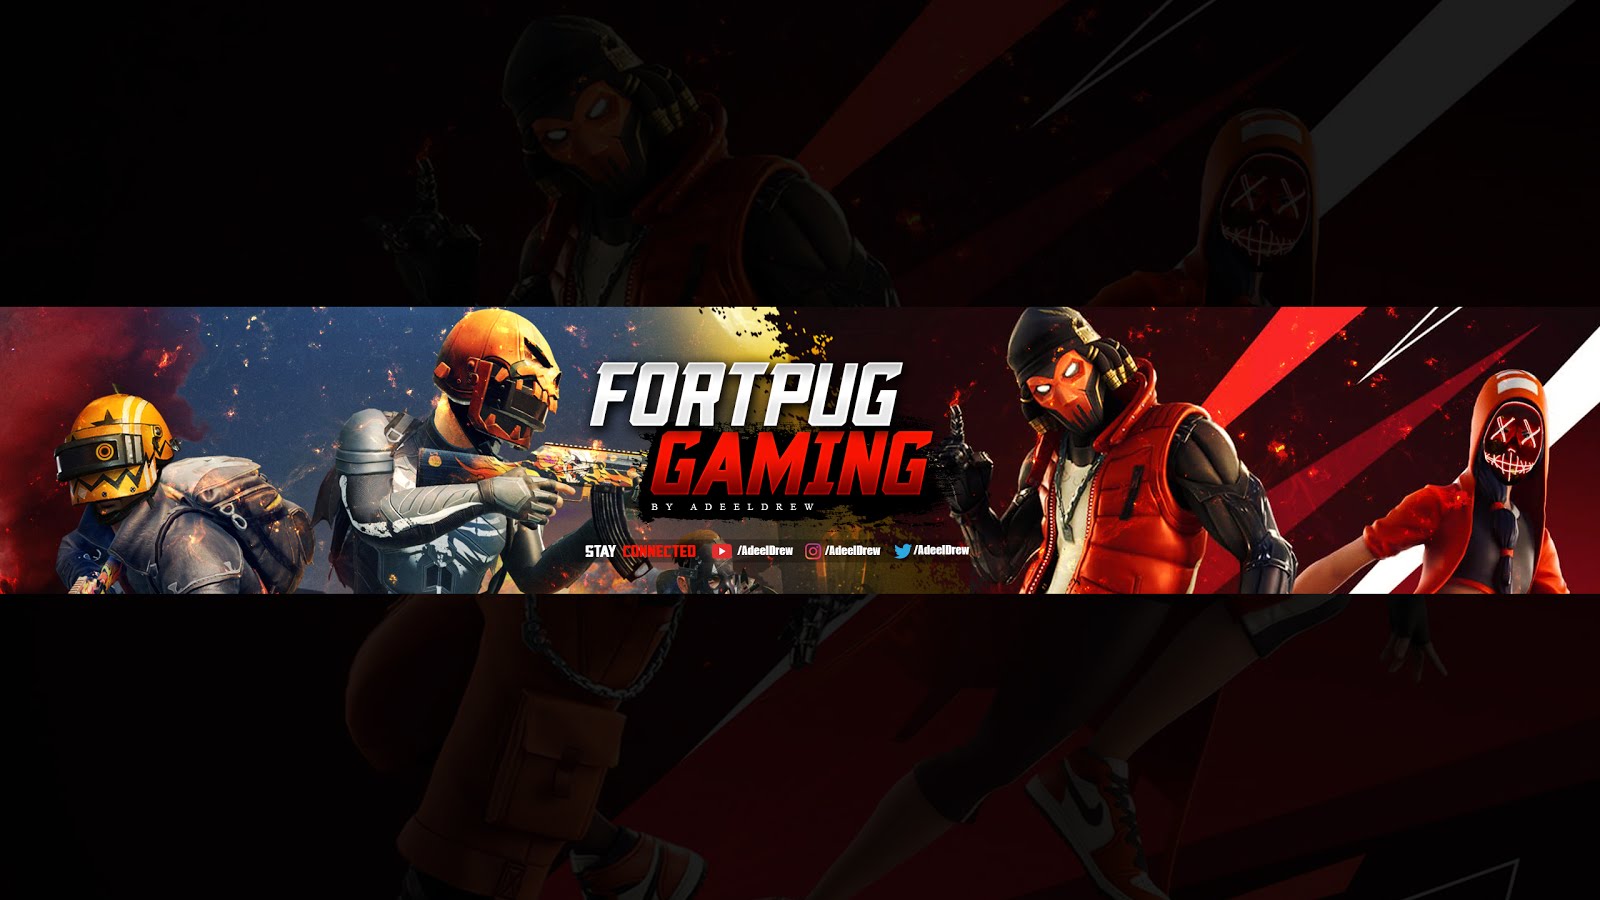 Fortpug Gaming Banner Art For Youtube Free Download Psd Template By Adeeldrew